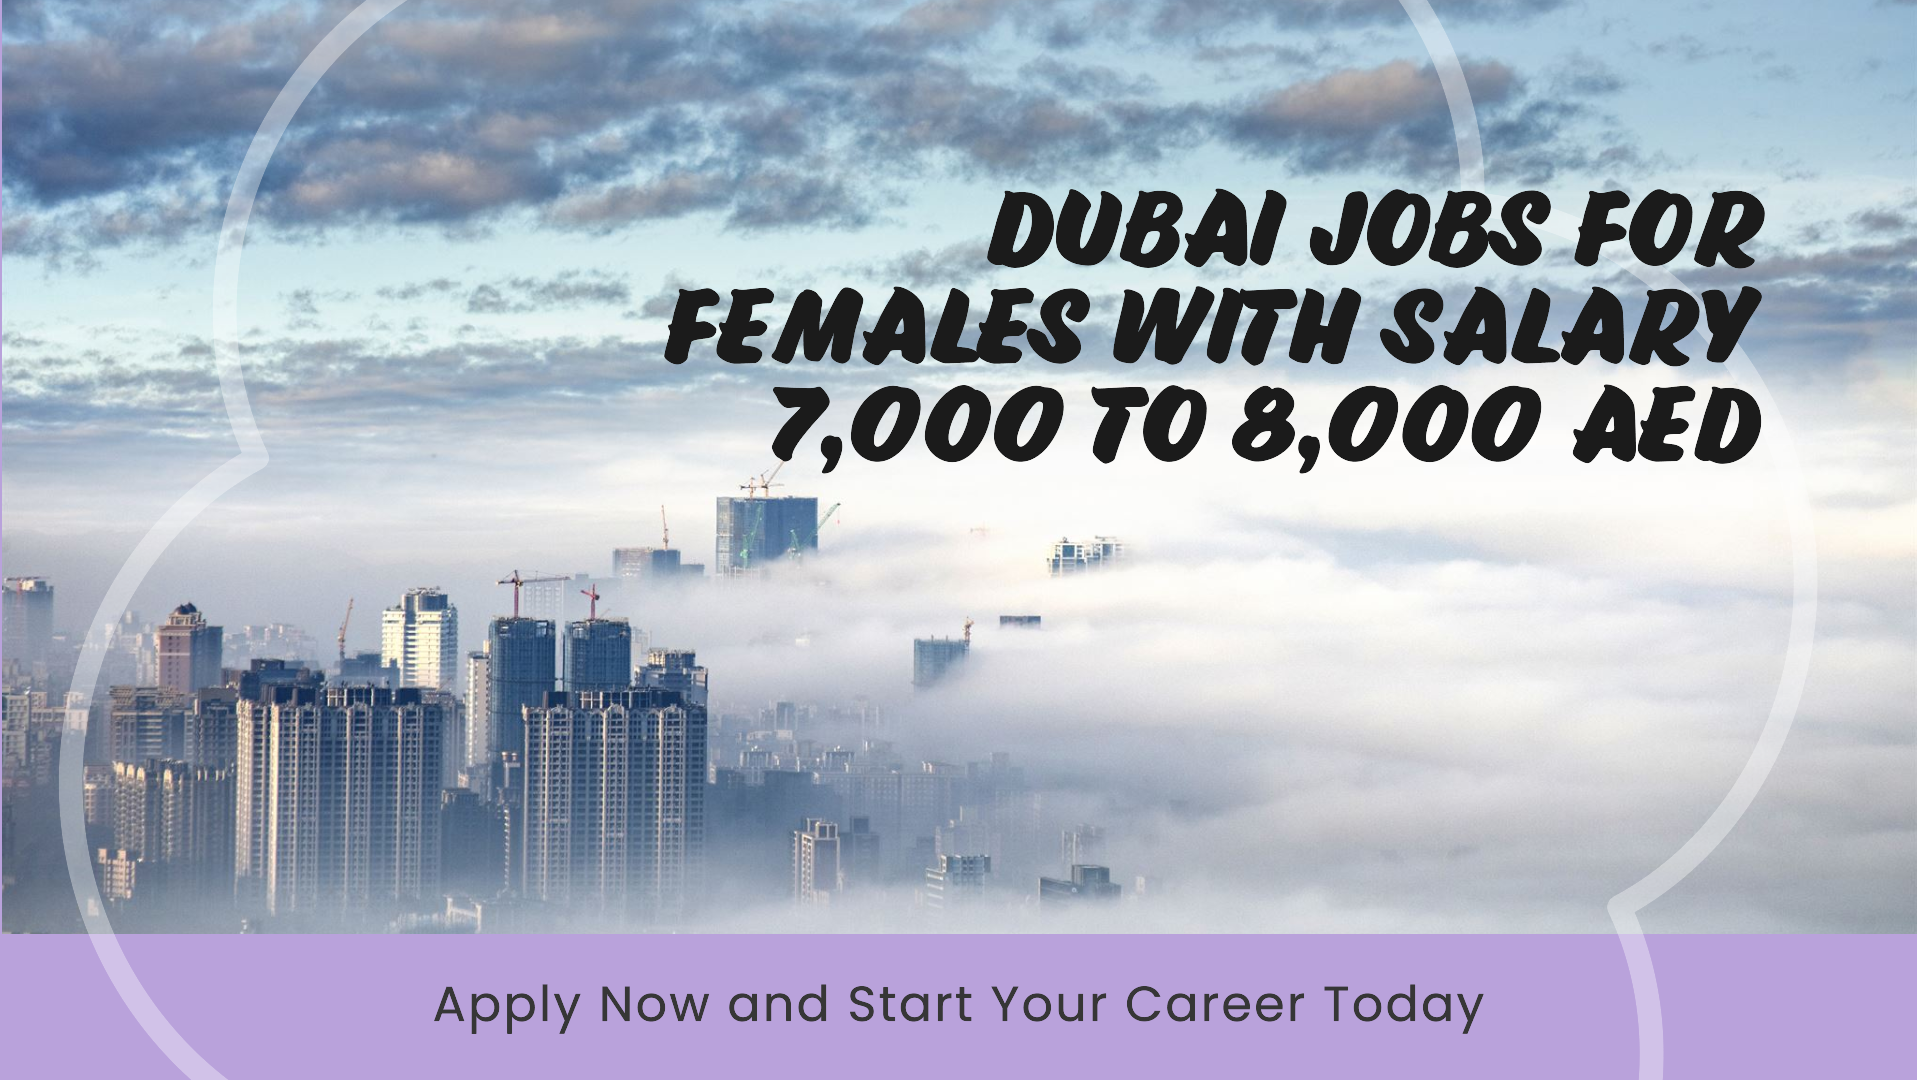 dubai jobs for females with salary 7,000 to 8,000 AED